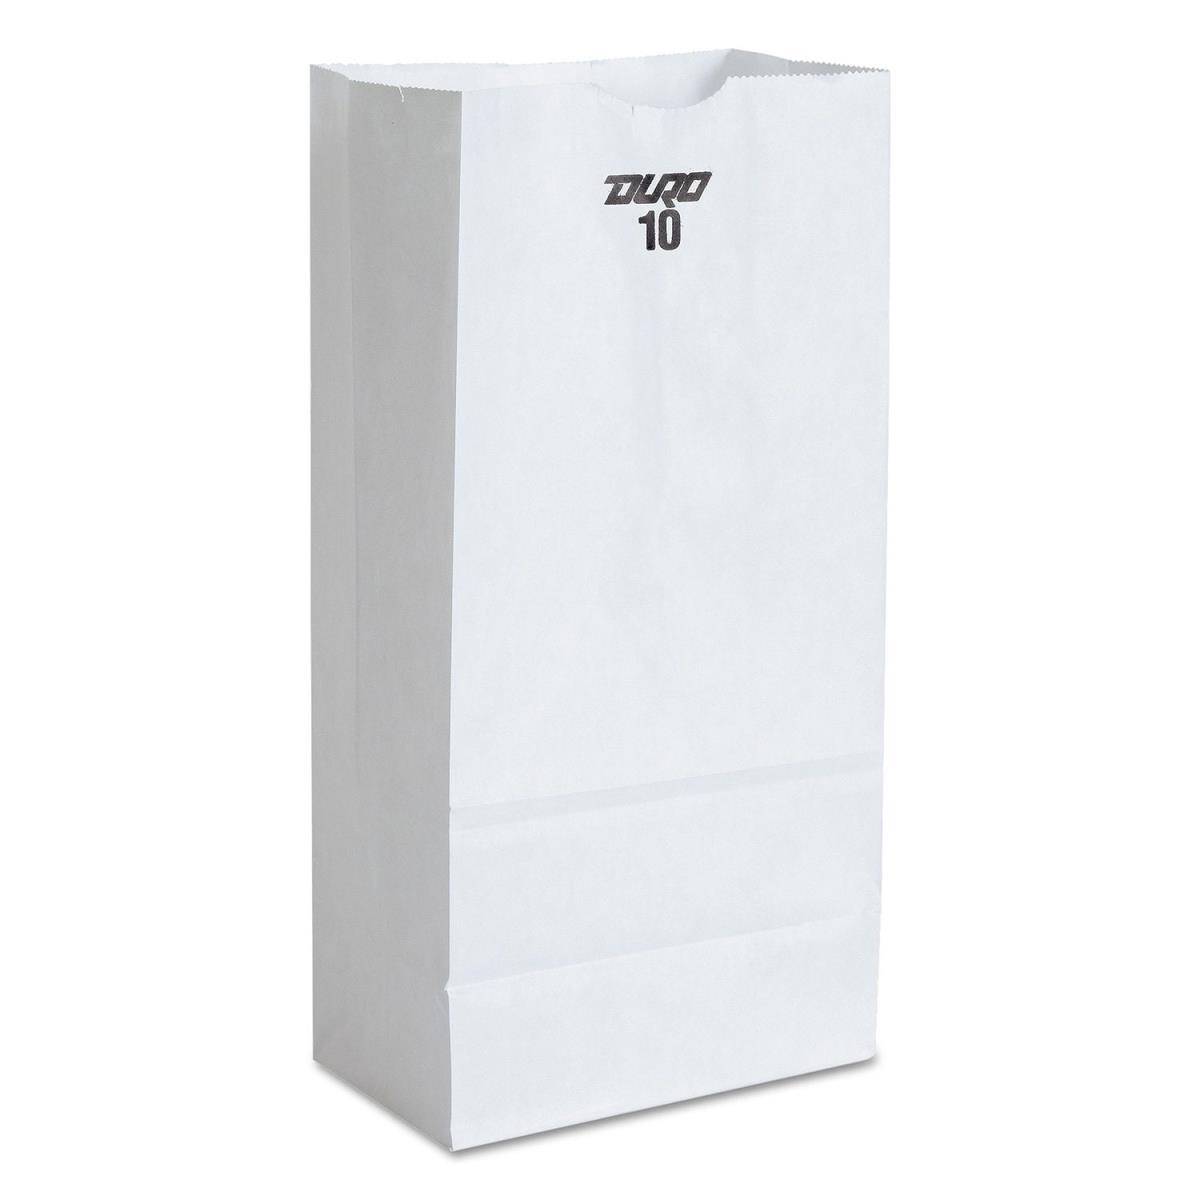 Duro Hilex Poly 51045 White Grocery Bag - Case Of 500